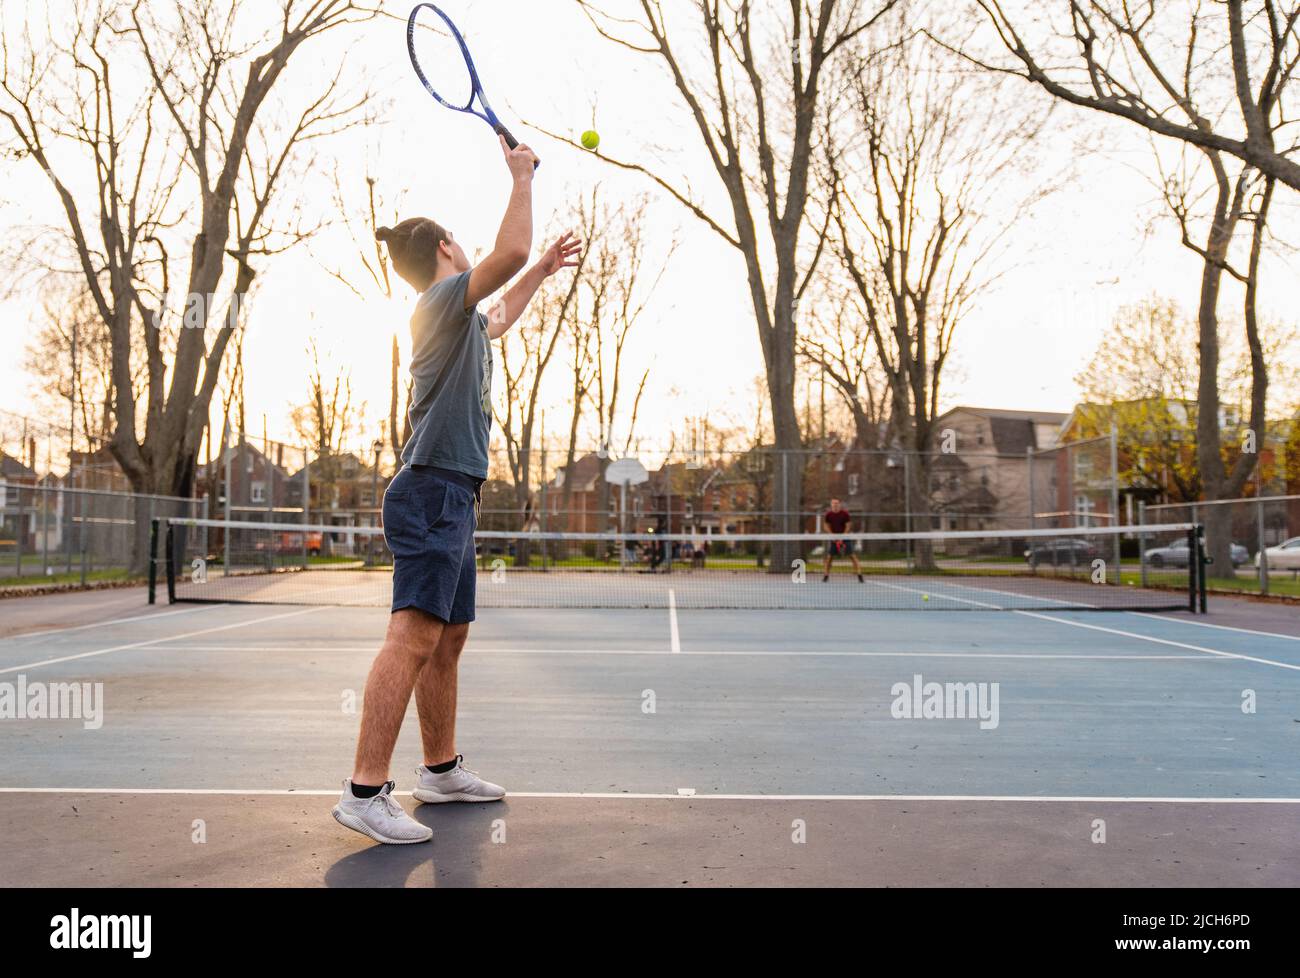 Teenage boy playing tennis on outdoor hard court in spring. Stock Photo